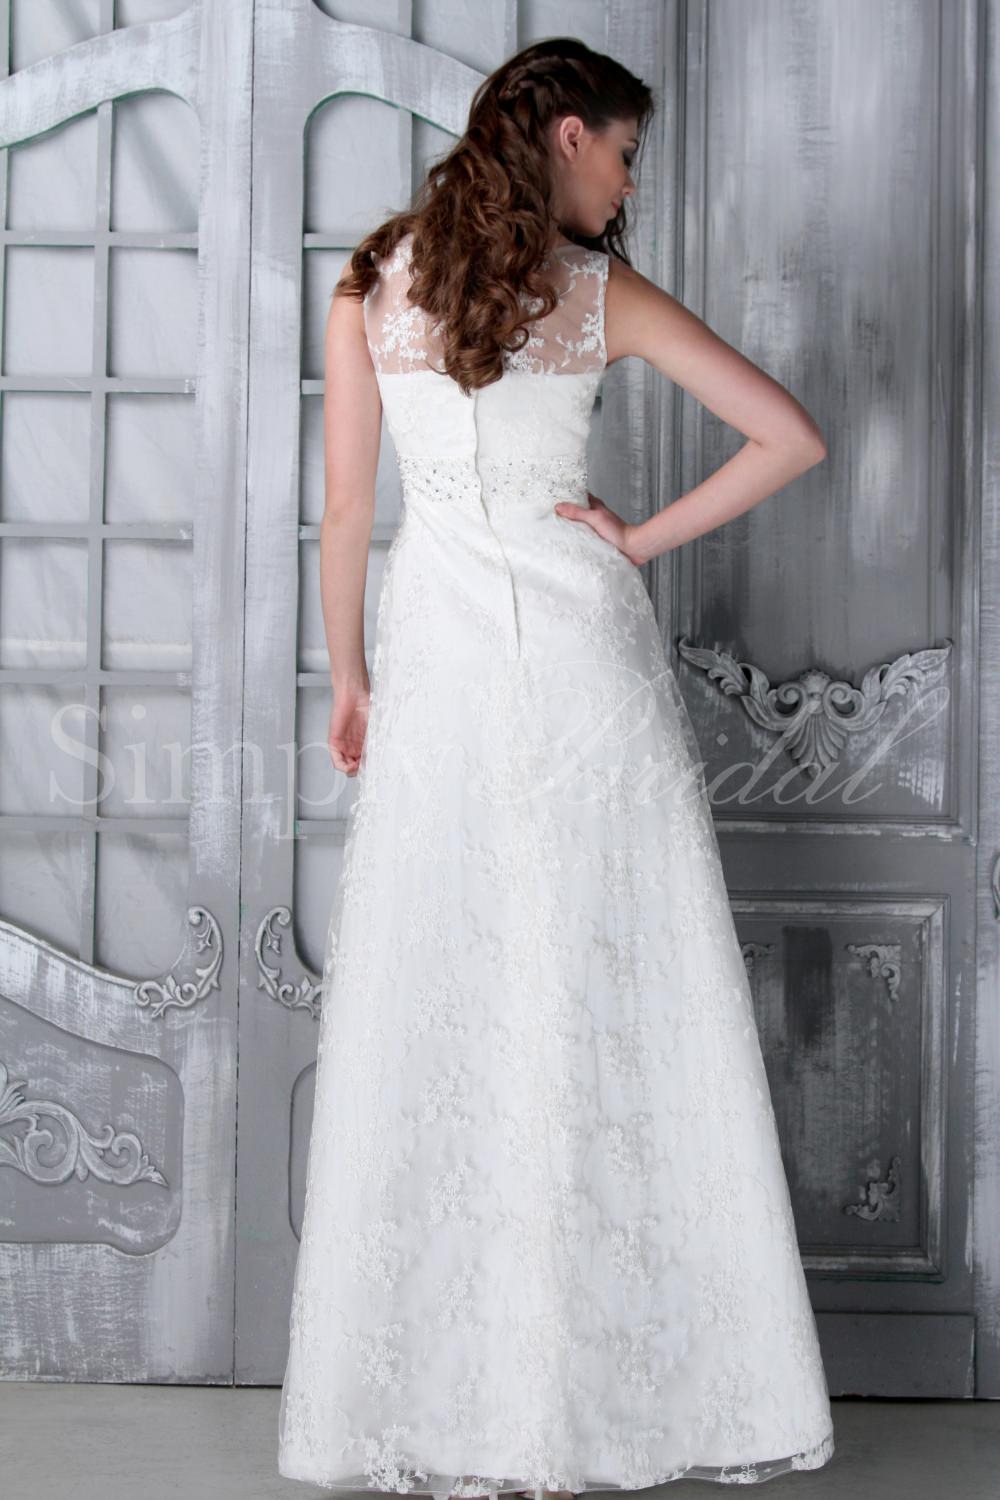 2013 wedding dress trends bride in dress trimmed with lace guest post by lavimage montreal